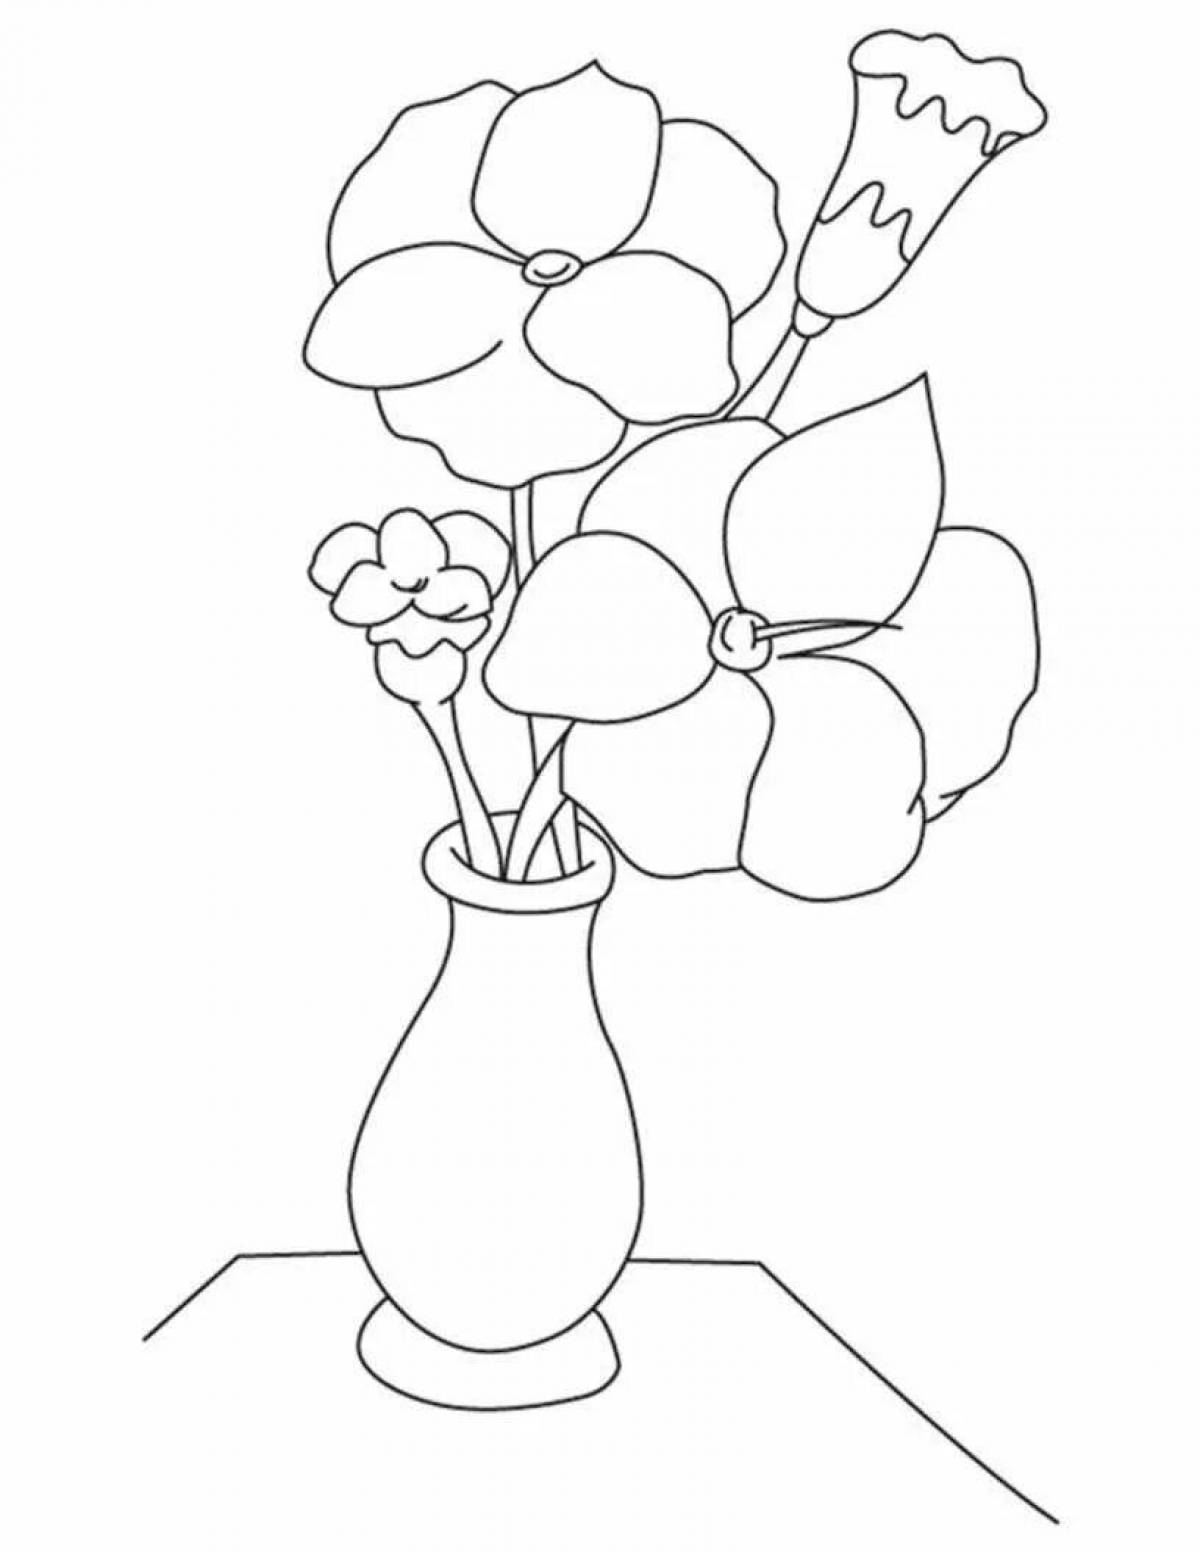 Coloring fairy vase with flowers